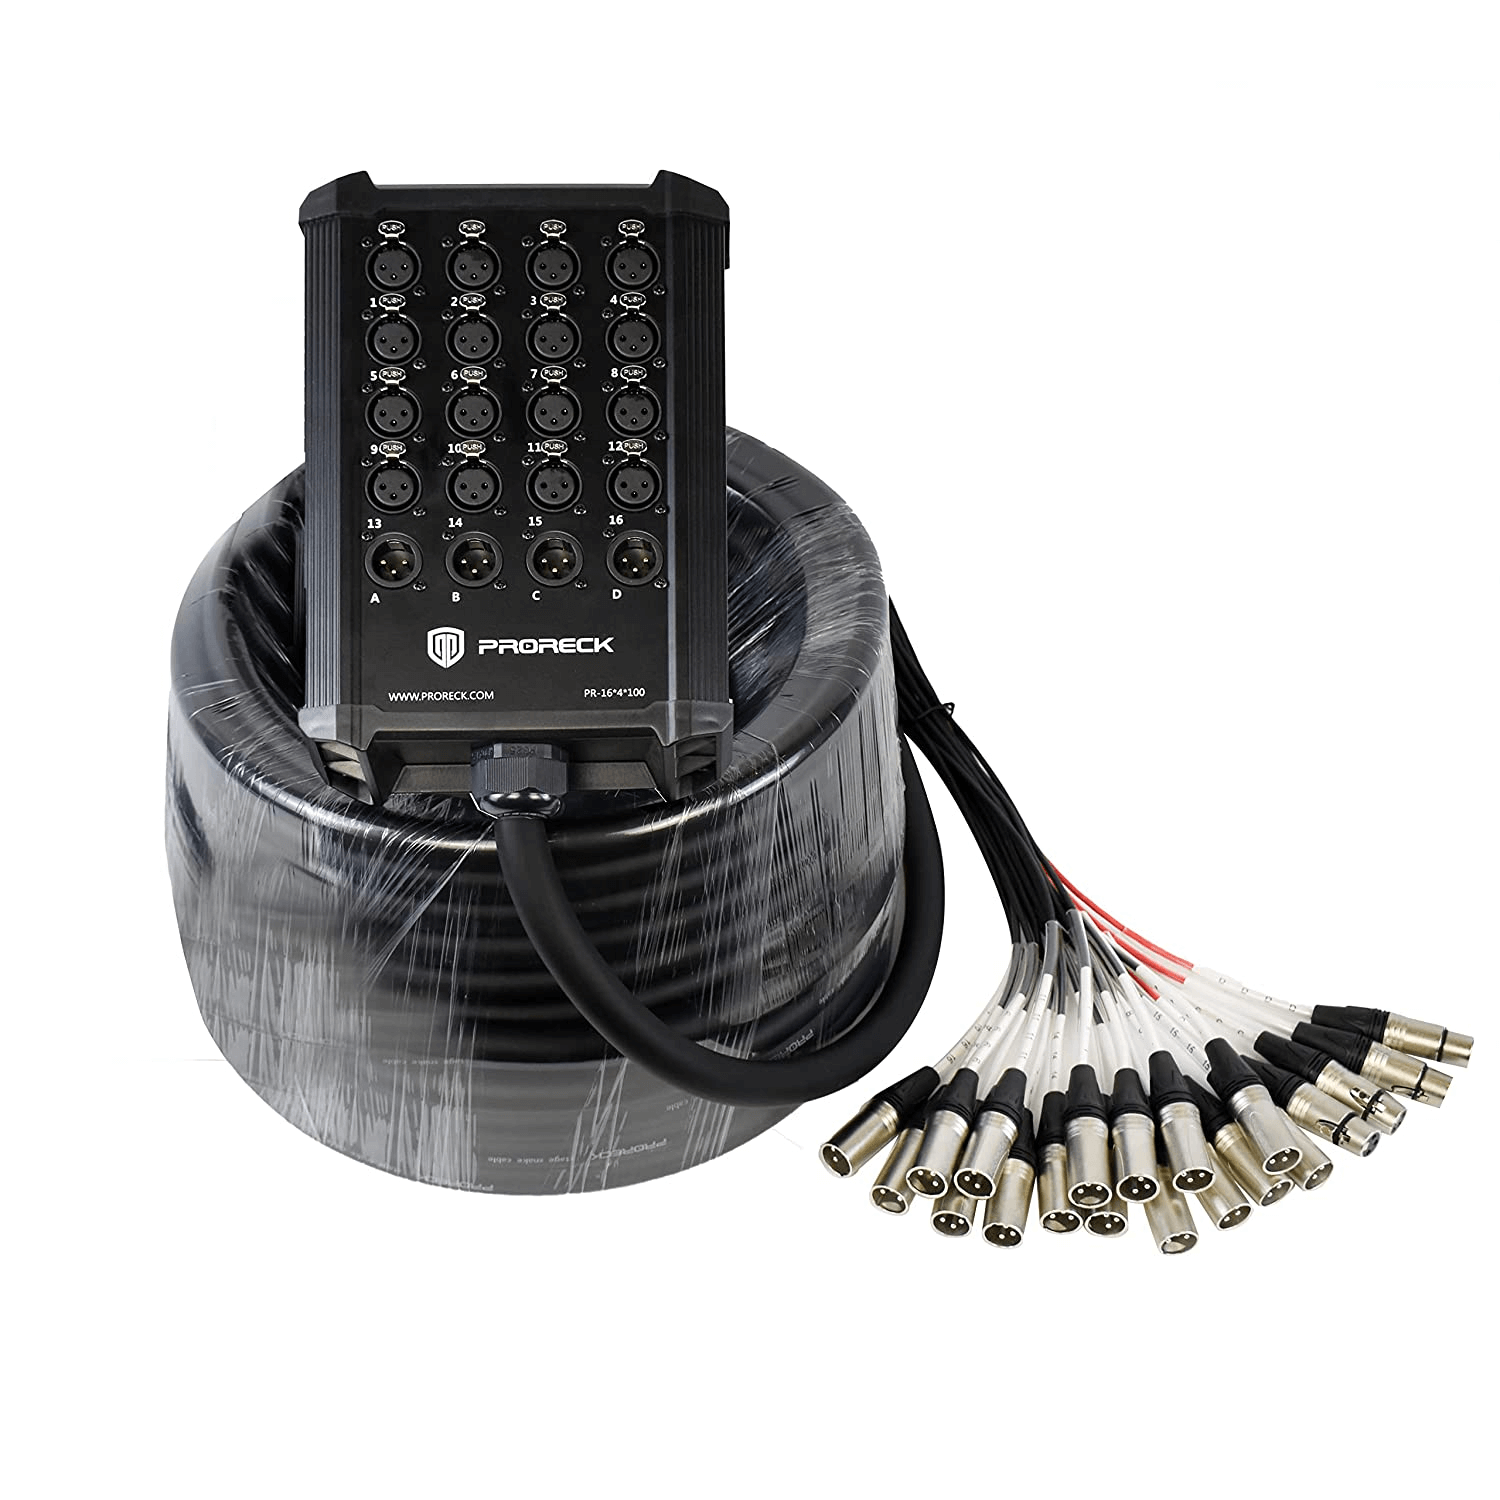 PRORECK 8-Channel Low Profile XLR Send Circuit Board Snake Cables, XLR Splitter Cable for Live, Recording, Stage, Studio, 50 Feet Long